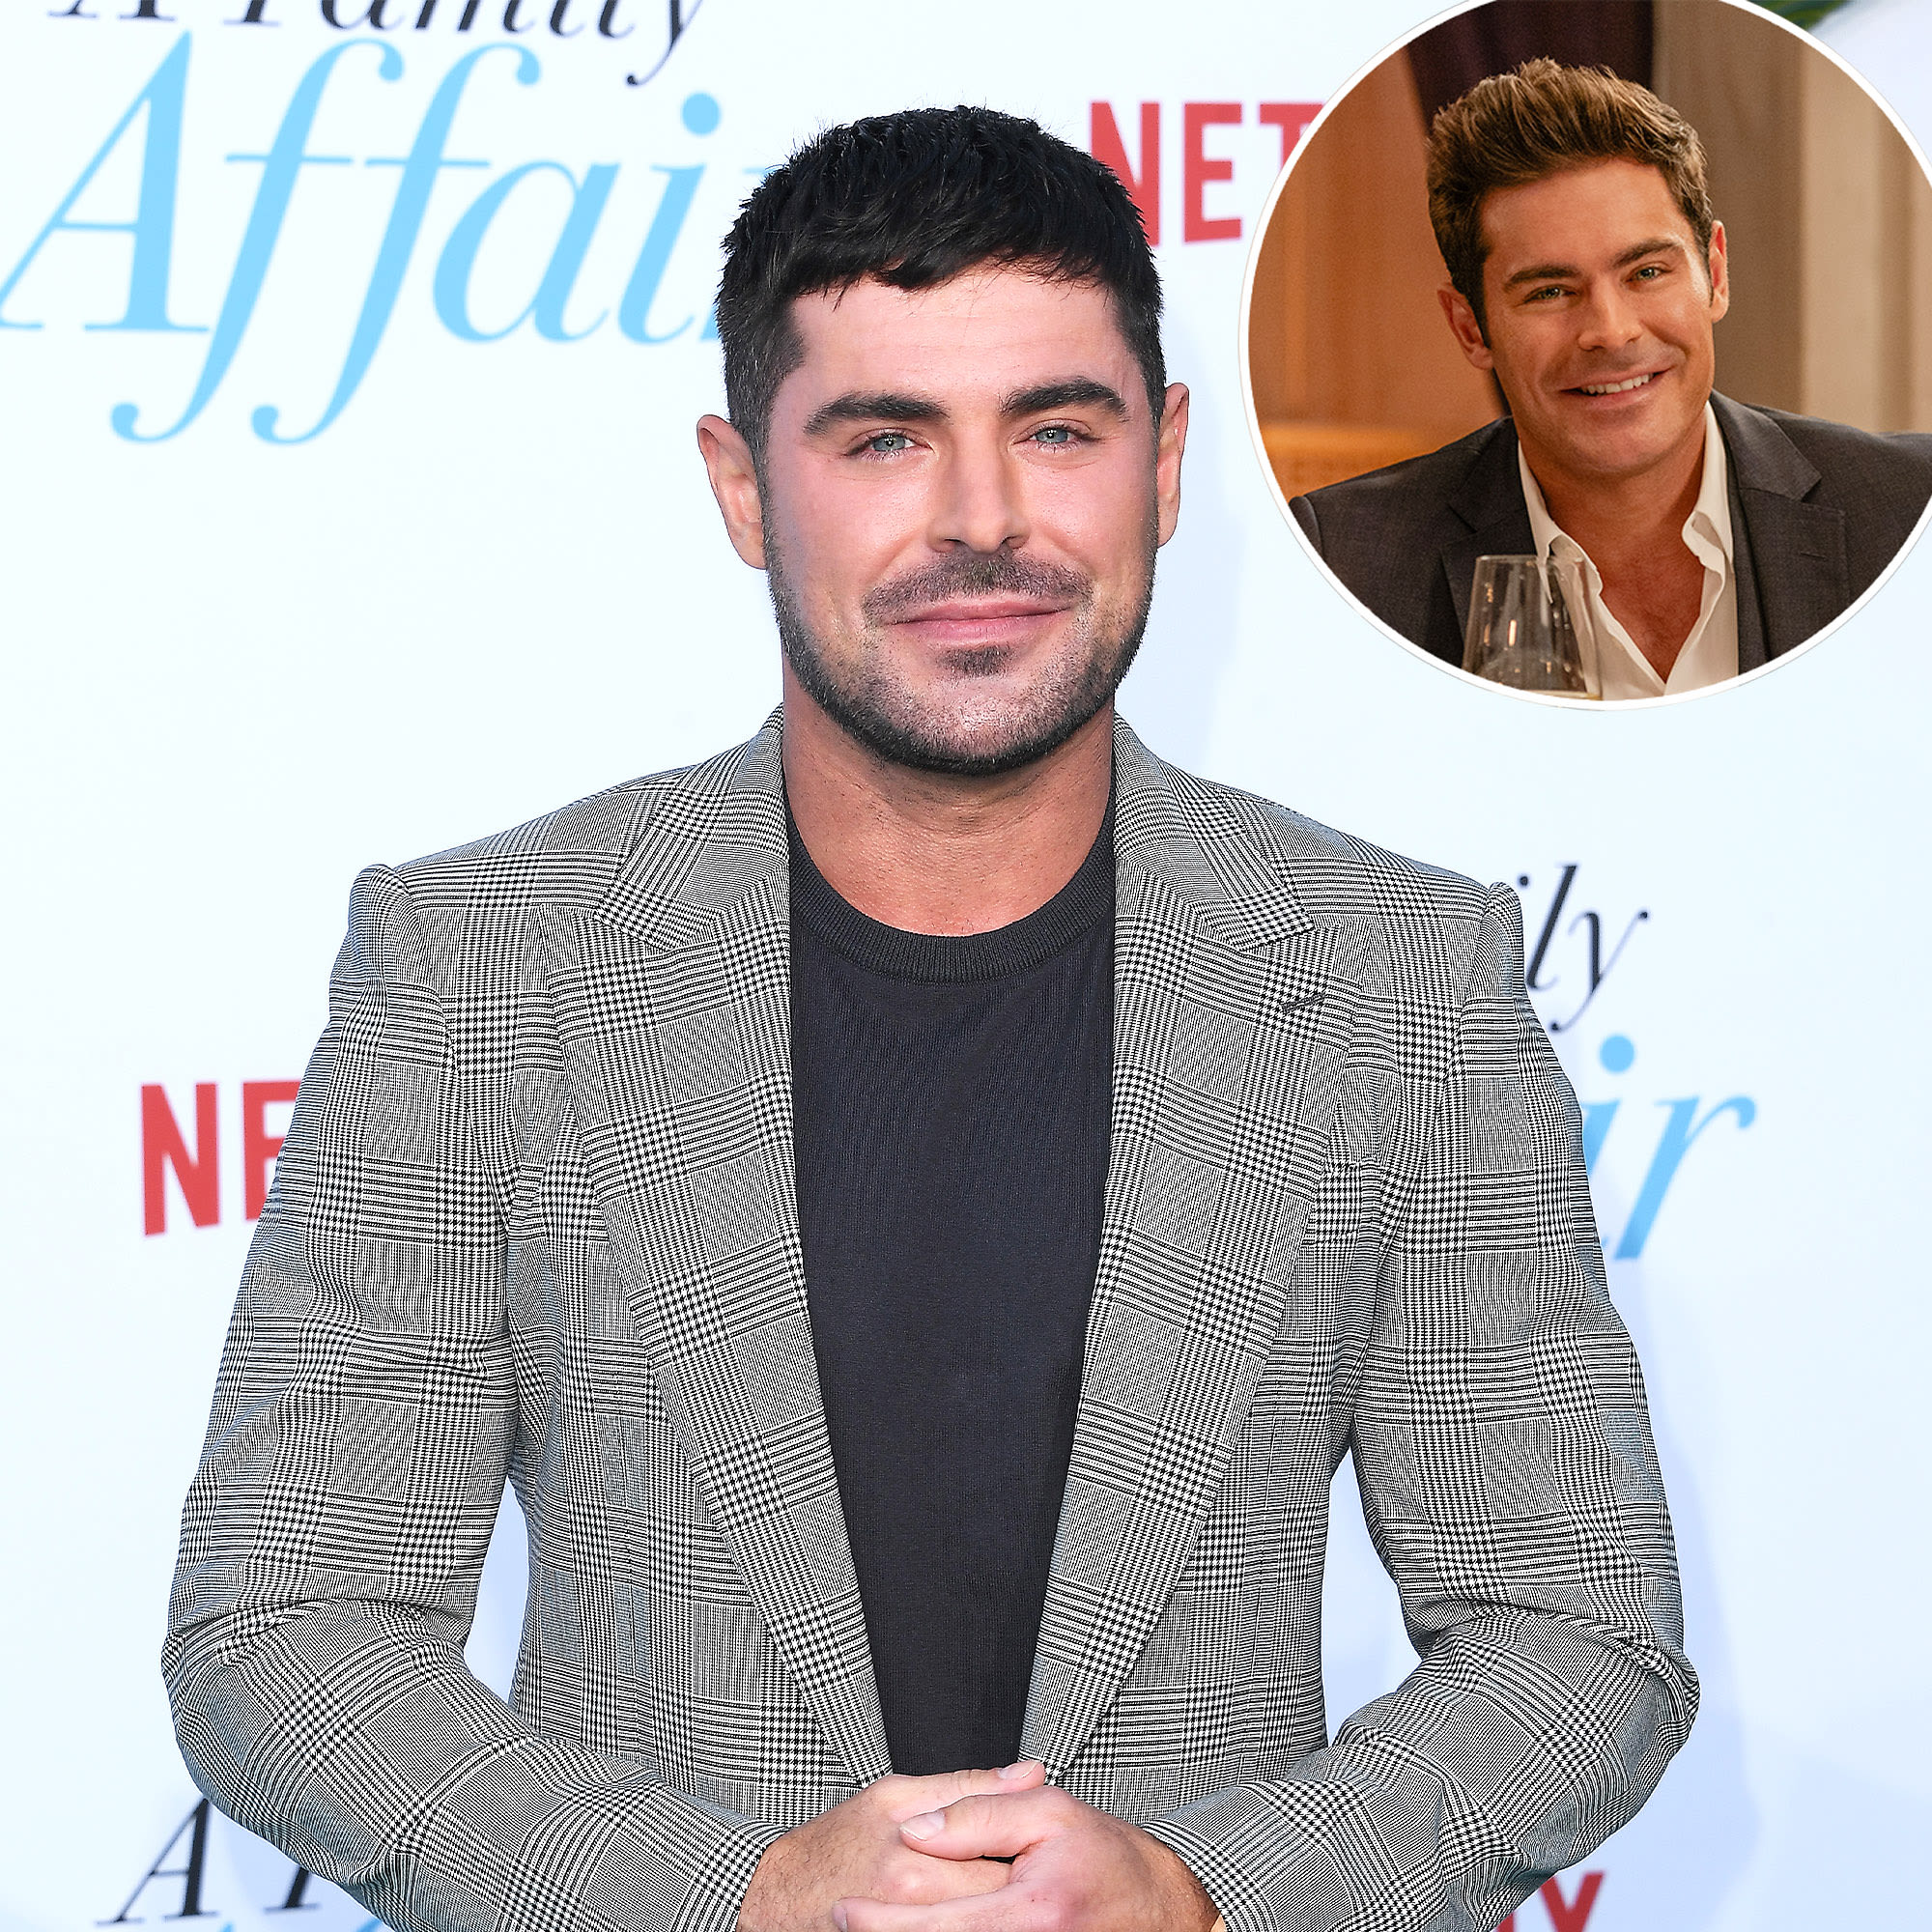 Fans Alarmed by Zac Efron’s Face in New Netflix Movie ‘A Family Affair’: ‘WTF Has He Done?’